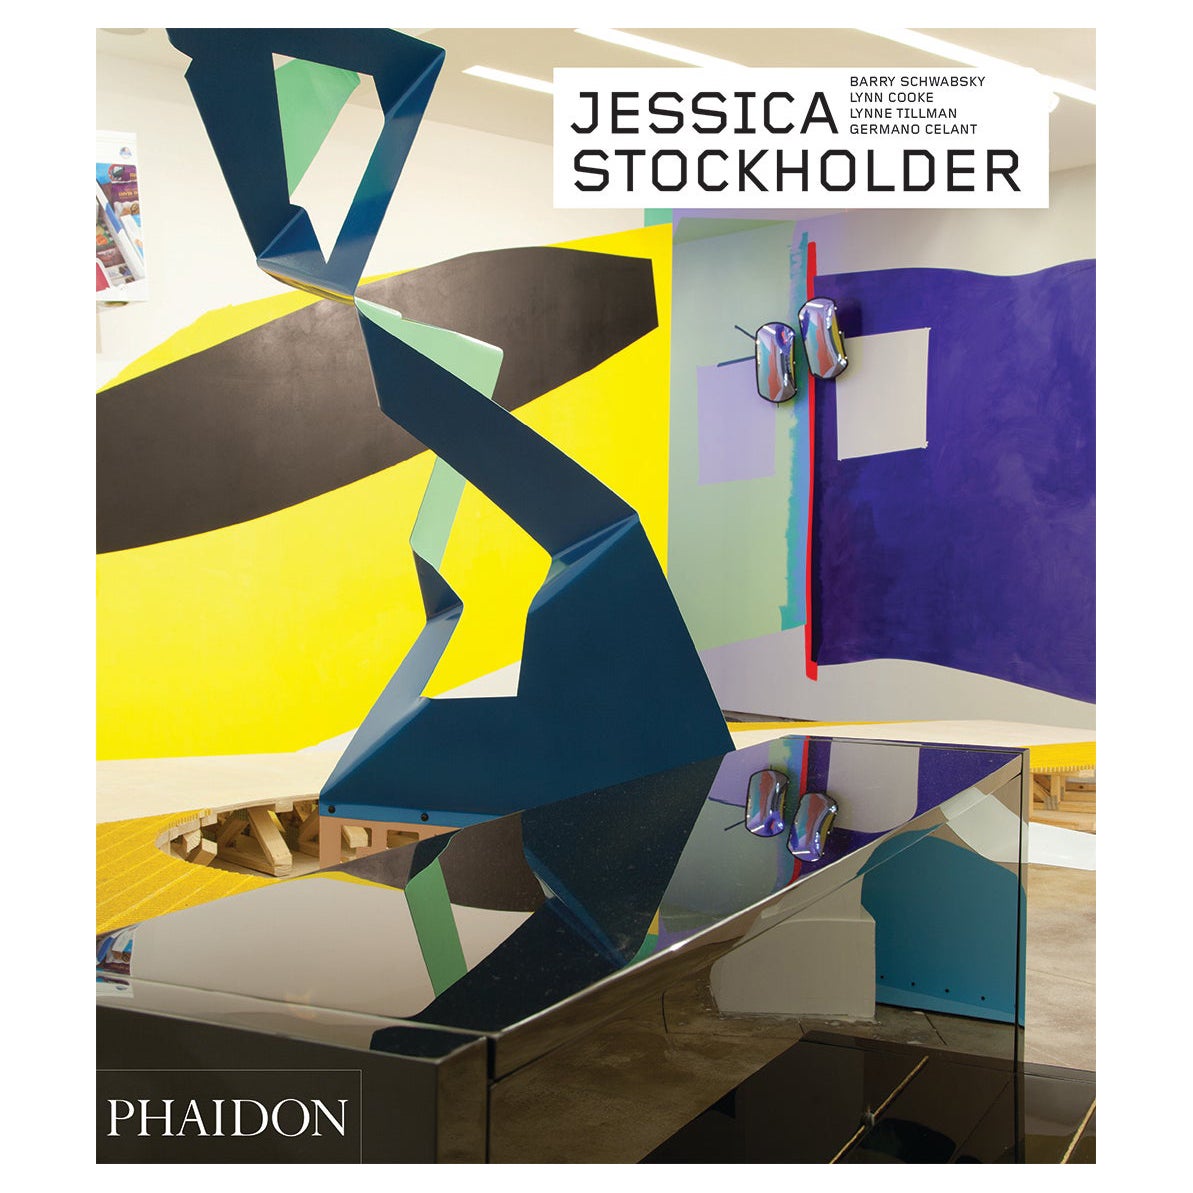 Jessica Stockholder Revised and Expanded Phaidon Contemporary Artists Series